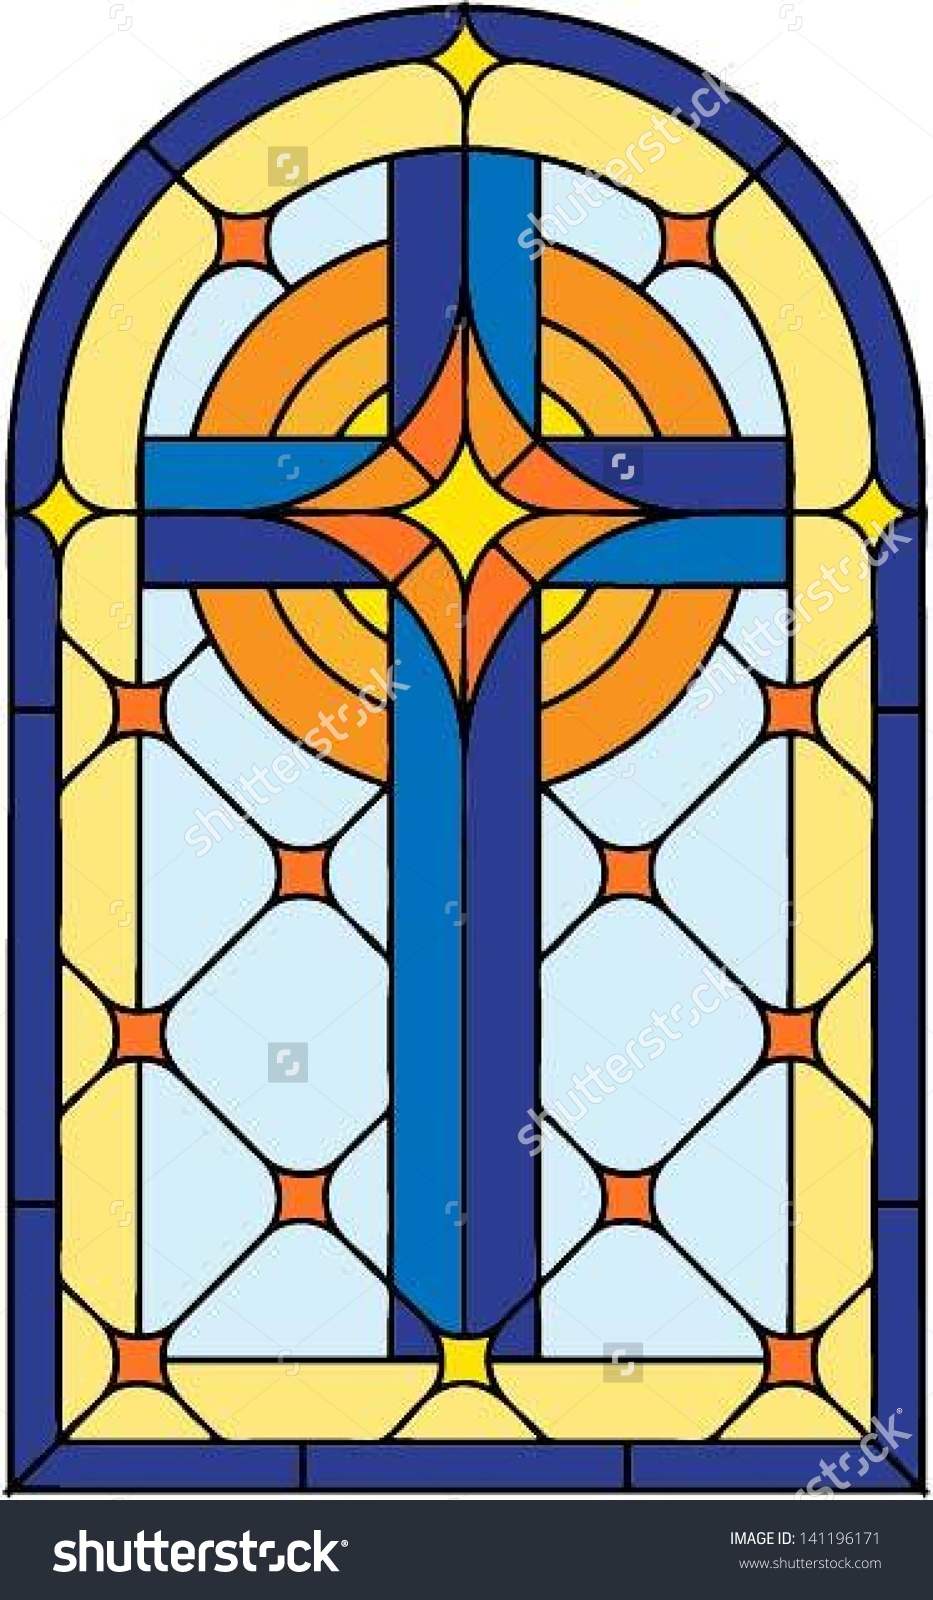 stained glass clipart - photo #19